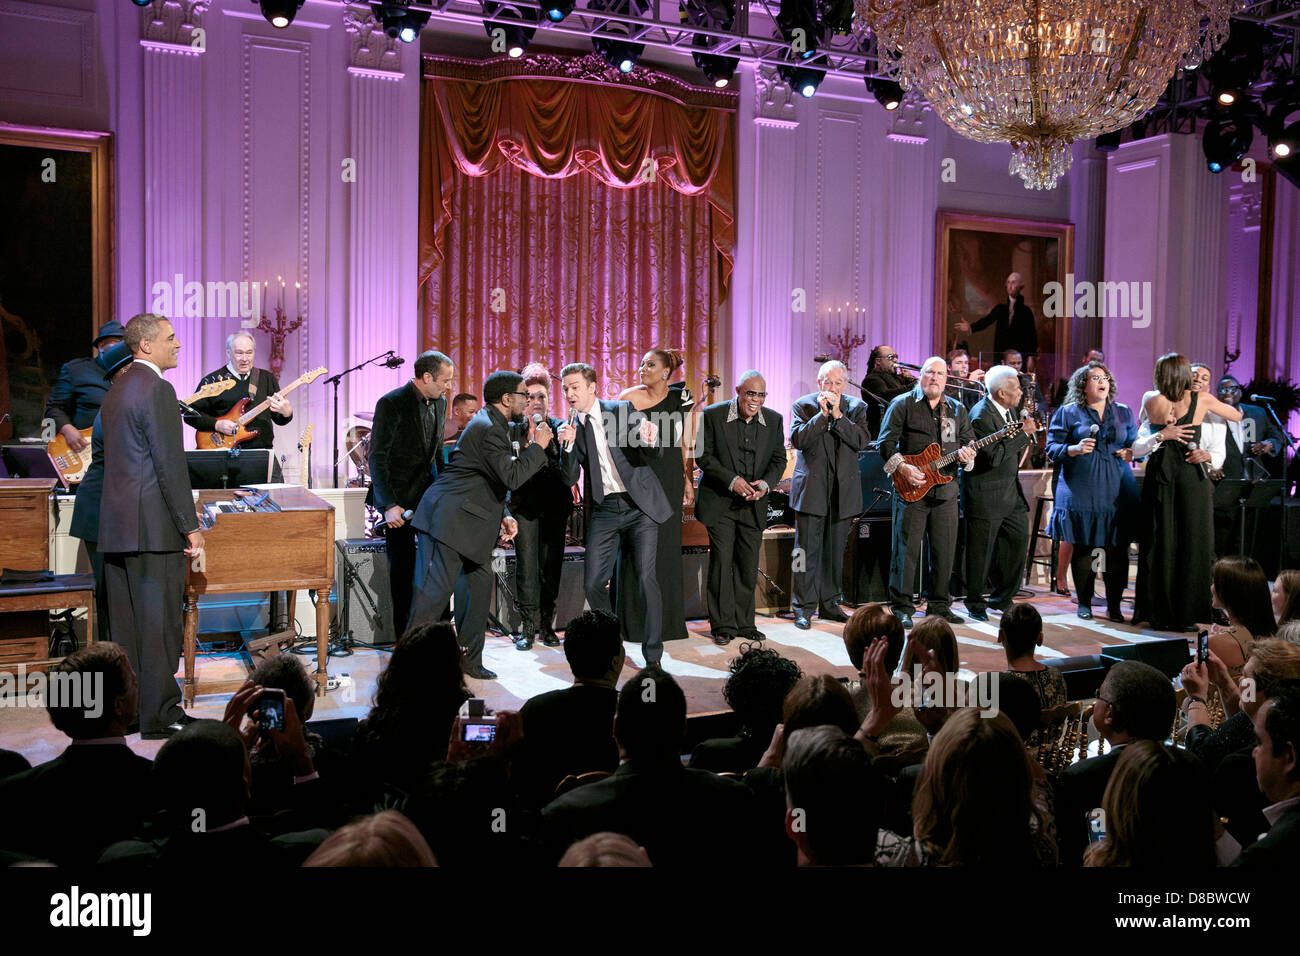 US President Barack Obama and First Lady Michelle Obama join musicians on stage during the finale of the “In Performance at the White House: Memphis Soul” concert in the East Room of the White House, April 9, 2013 in Washington, DC. The program included performances by Alabama Shakes, William Bell, Steve Cropper, Eddie Floyd, Ben Harper, Queen Latifah, Cyndi Lauper, Joshua Ledet, Sam Moore, Charlie Musselwhite, Mavis Staples, Justin Timberlake, and Booker T. Jones. Stock Photo